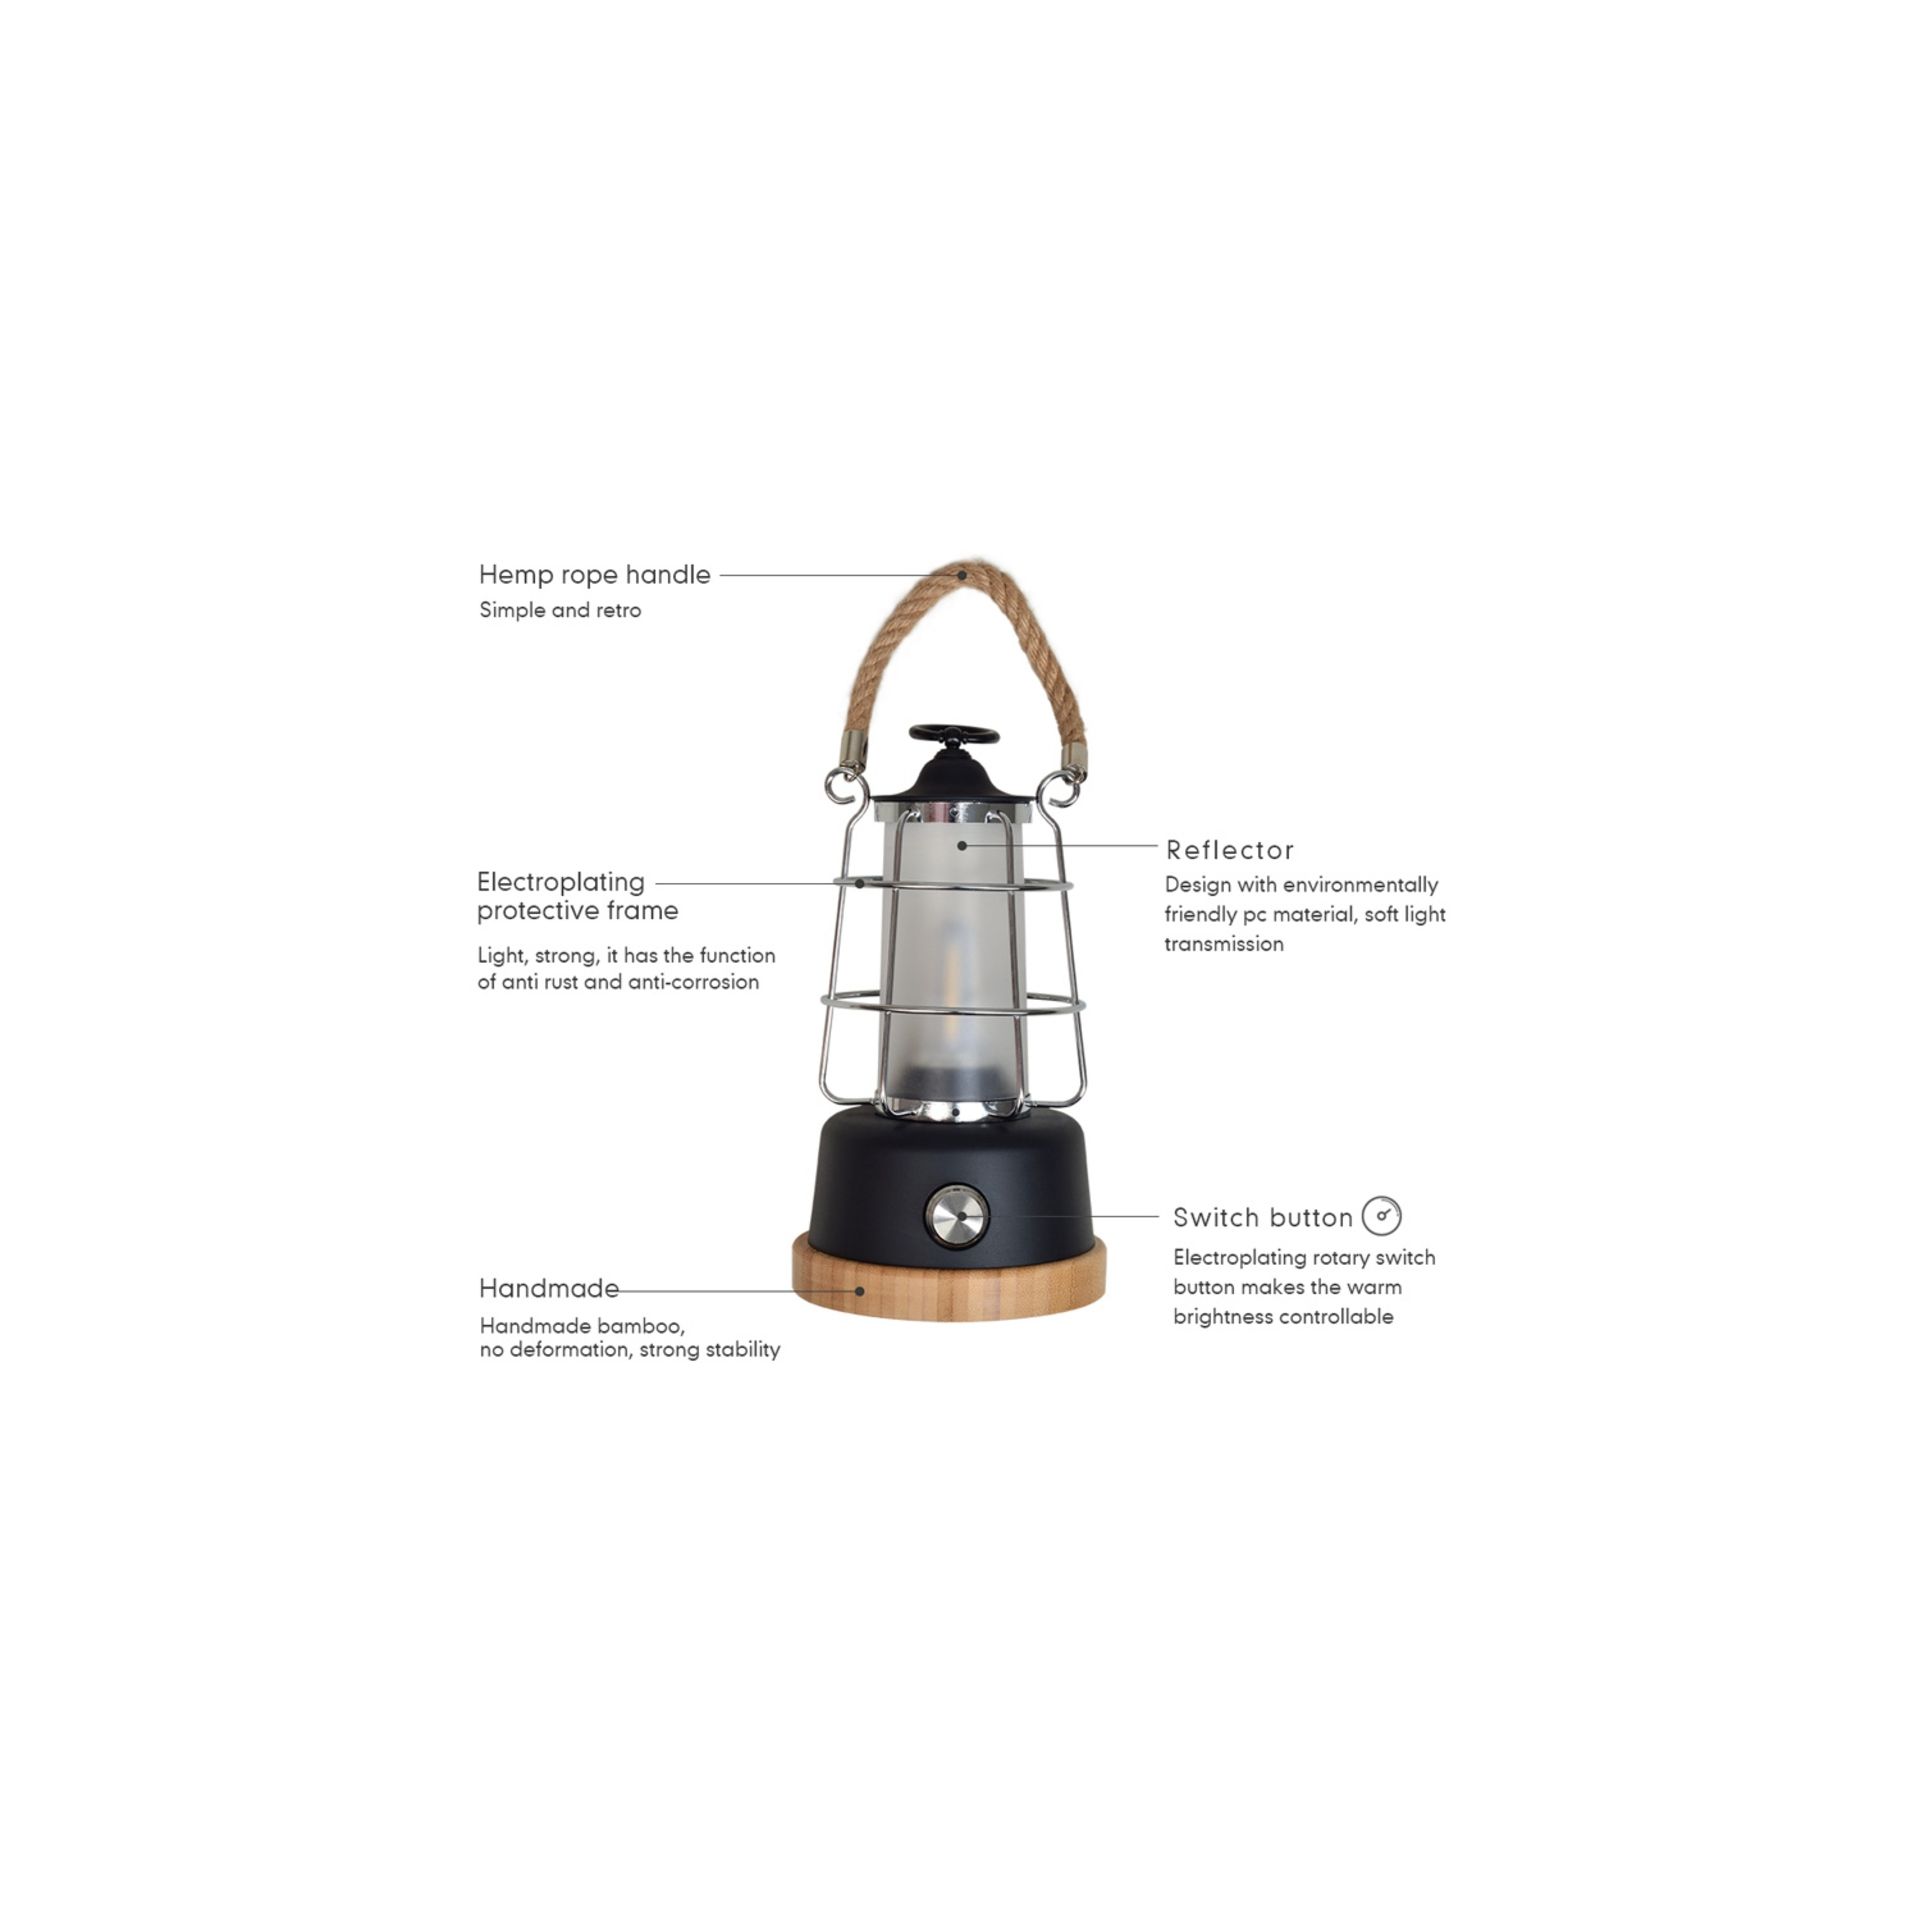 UNITS - LED RECHARGEABLE FLAME LIGHT 2500MAH CAMPING LANTERN (NEW IN BOX) (MSRP $90) - Image 2 of 3